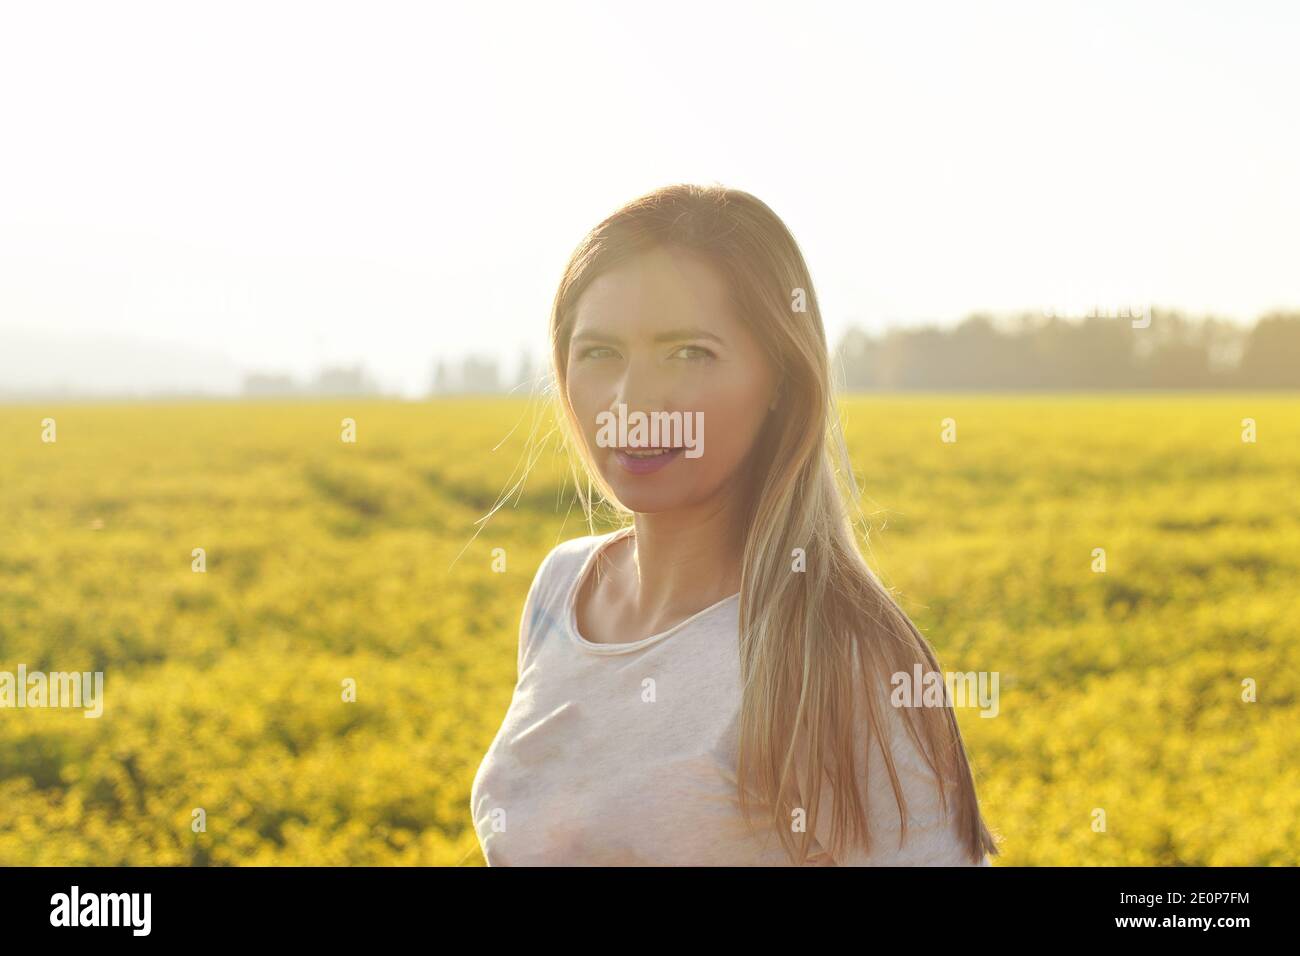 Portrait of young woman with long hair in strong afternoon backlight sun, blurred field with yellow flowers background Stock Photo